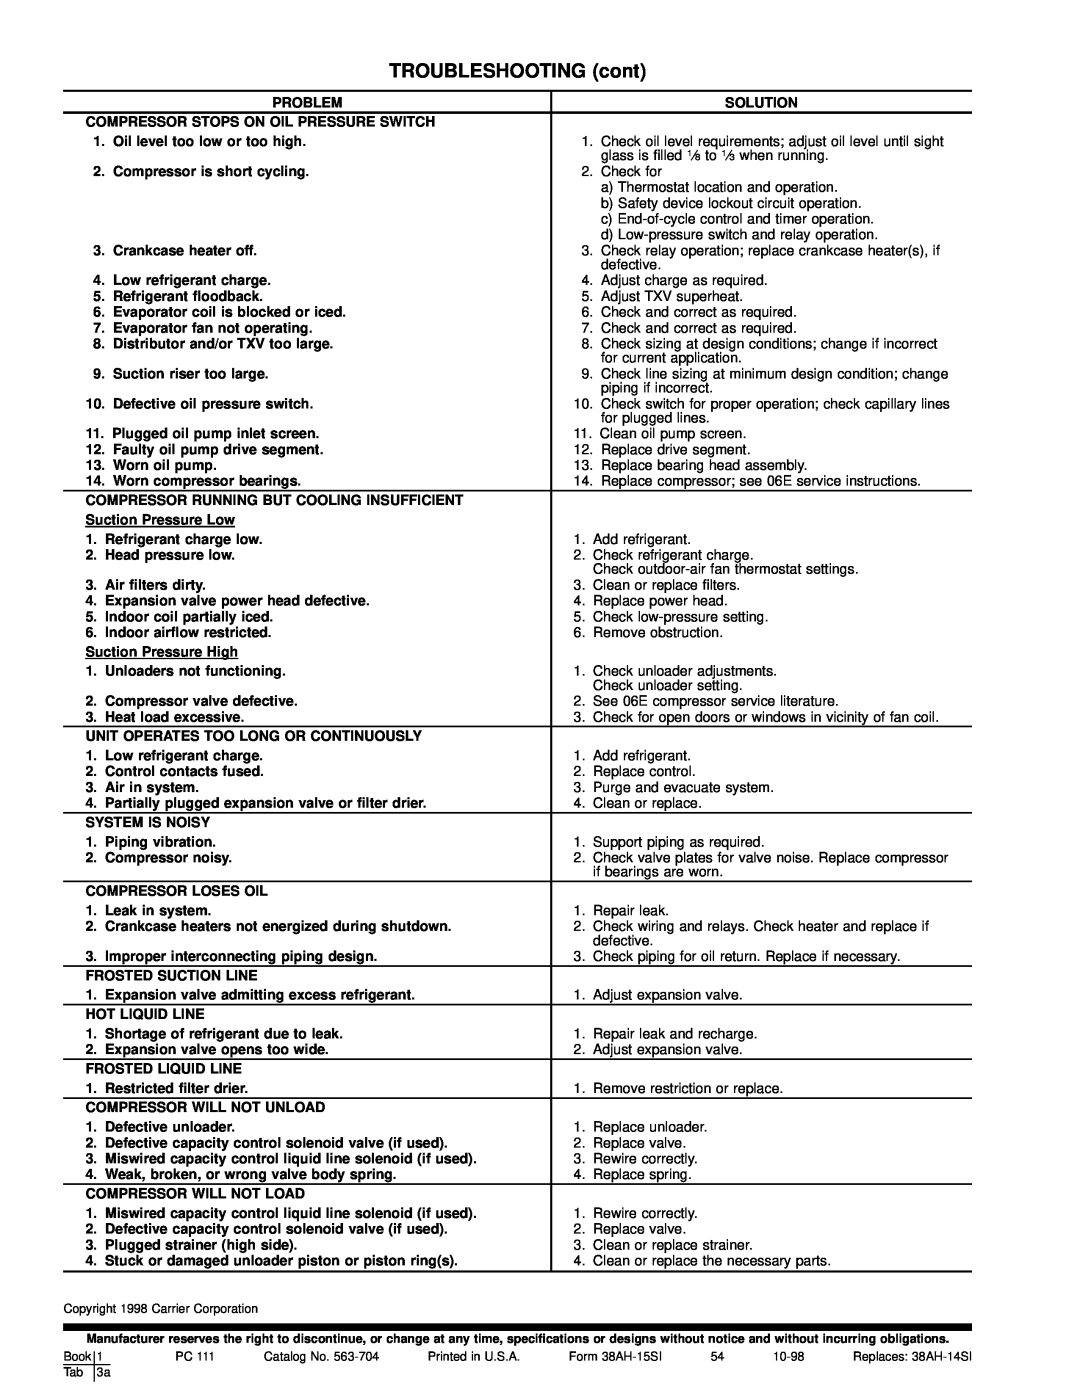 Carrier 38AH044-084 specifications TROUBLESHOOTING cont 